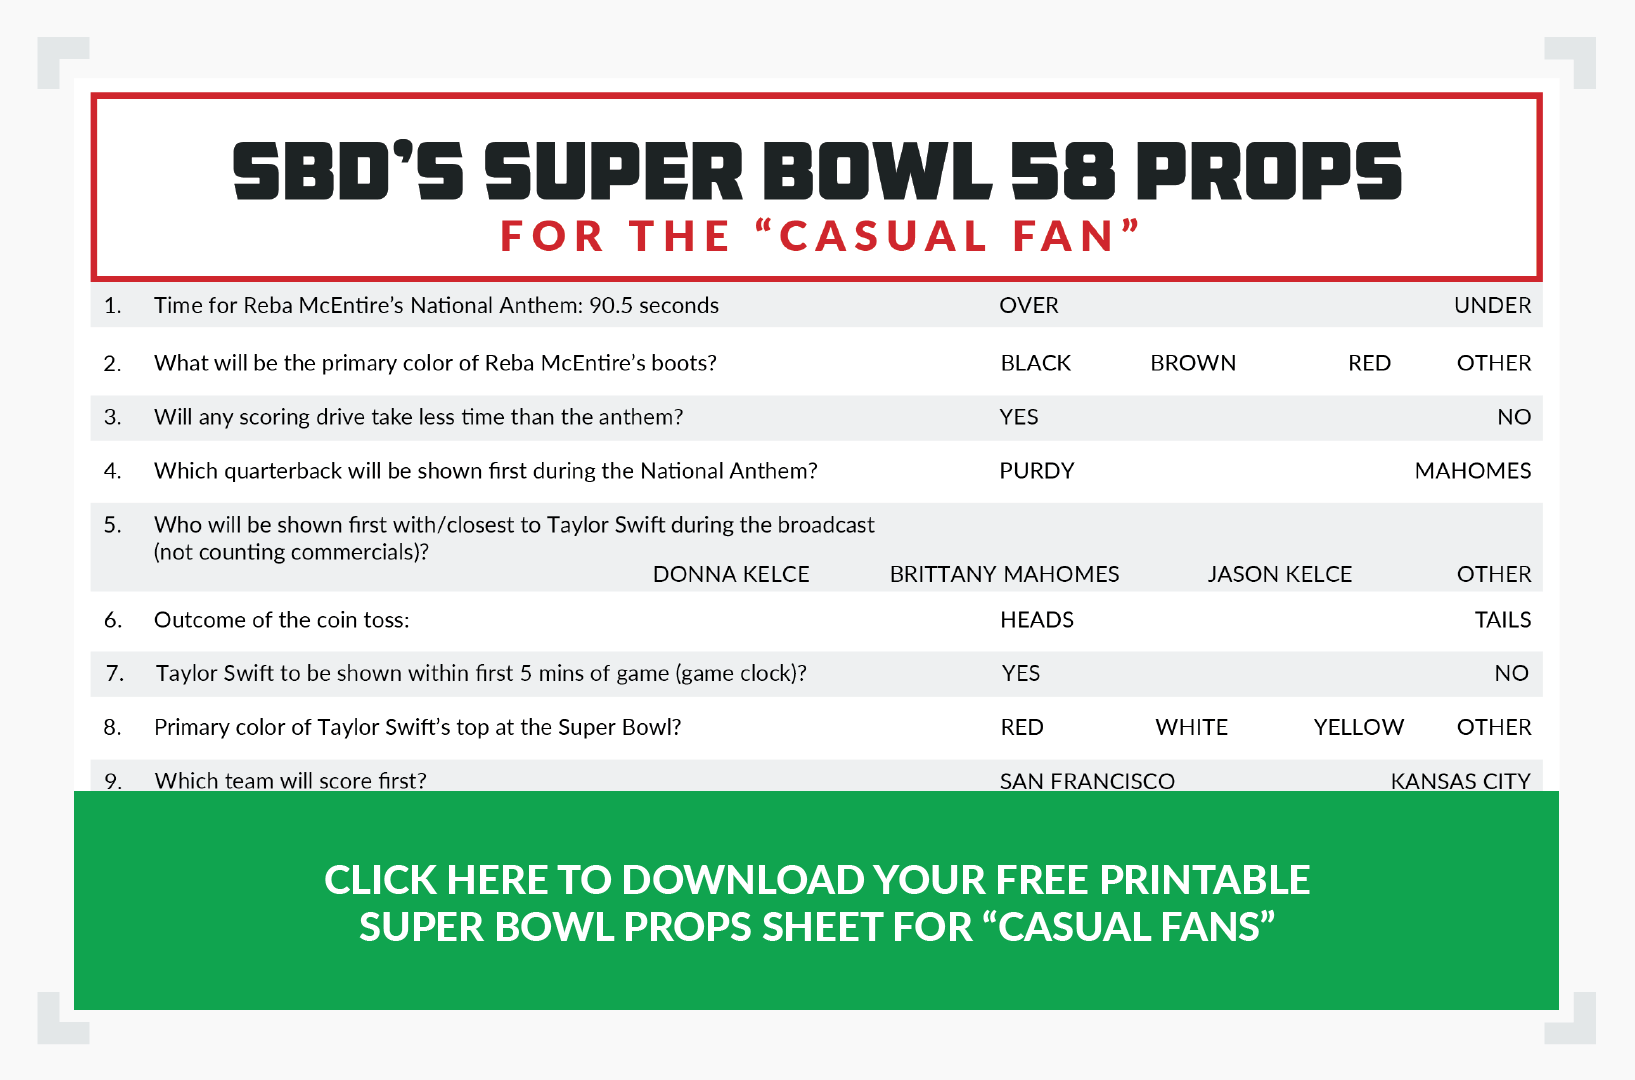 Super Bowl props sheet for casual fans